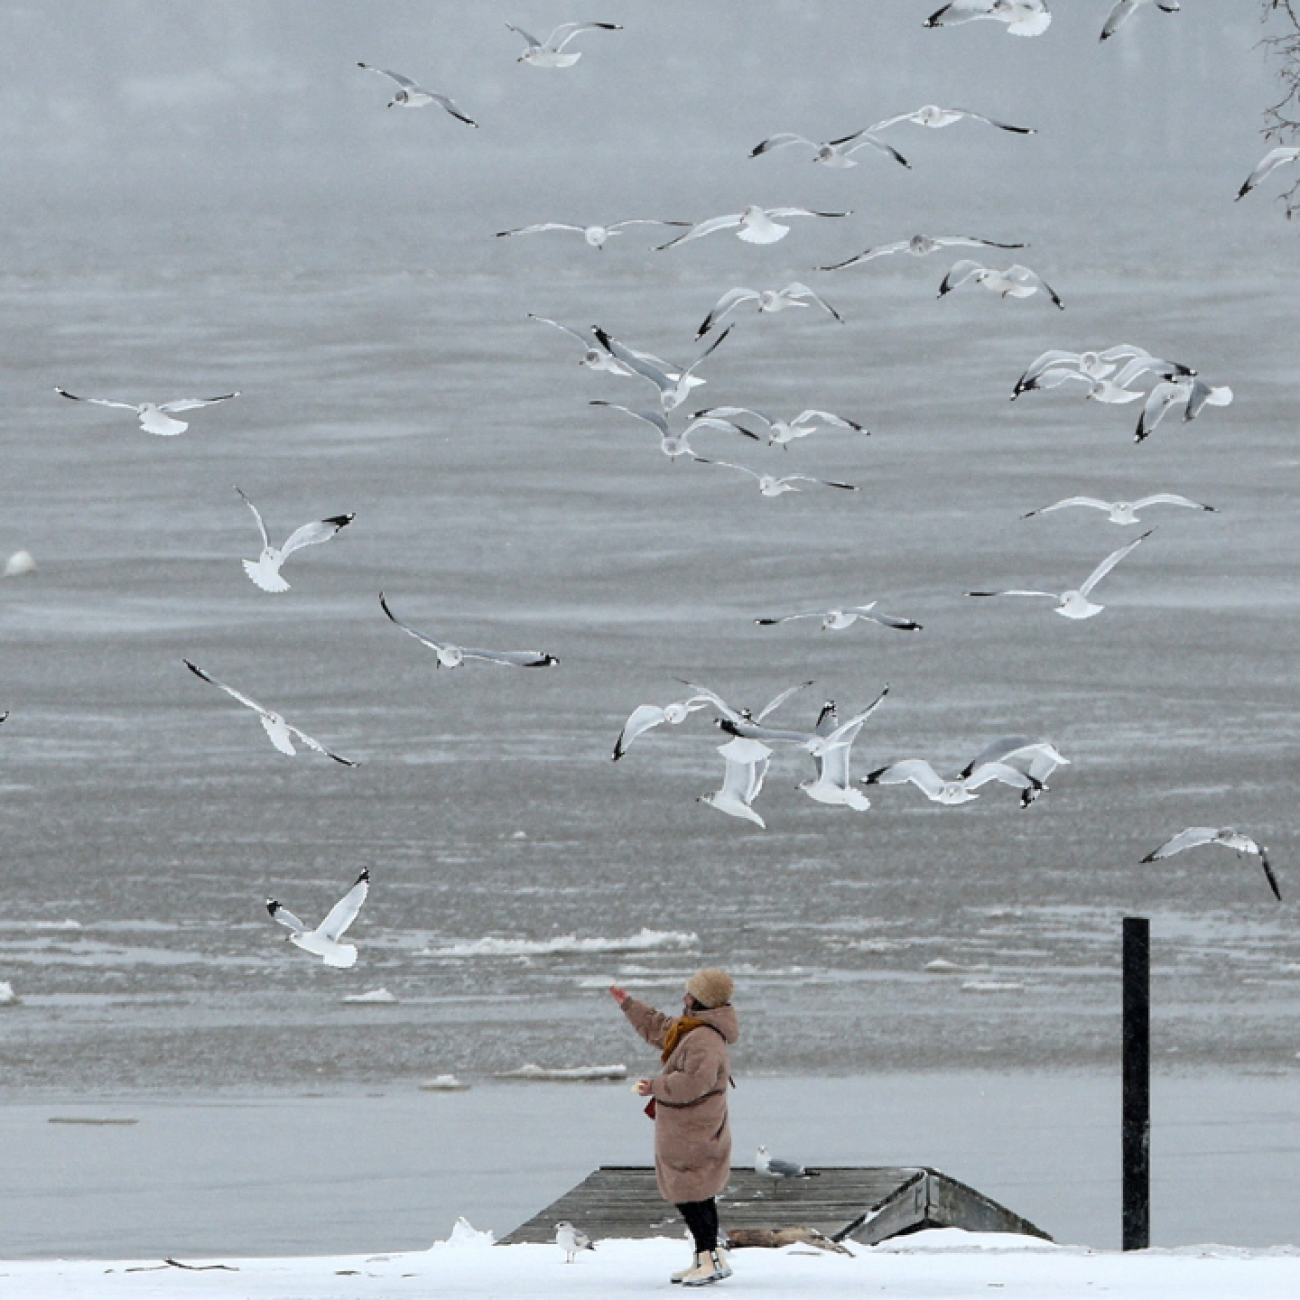 A woman feeds gulls along the Hudson River shore during a winter storm in Nyack, New York, on January 29, 2022. 